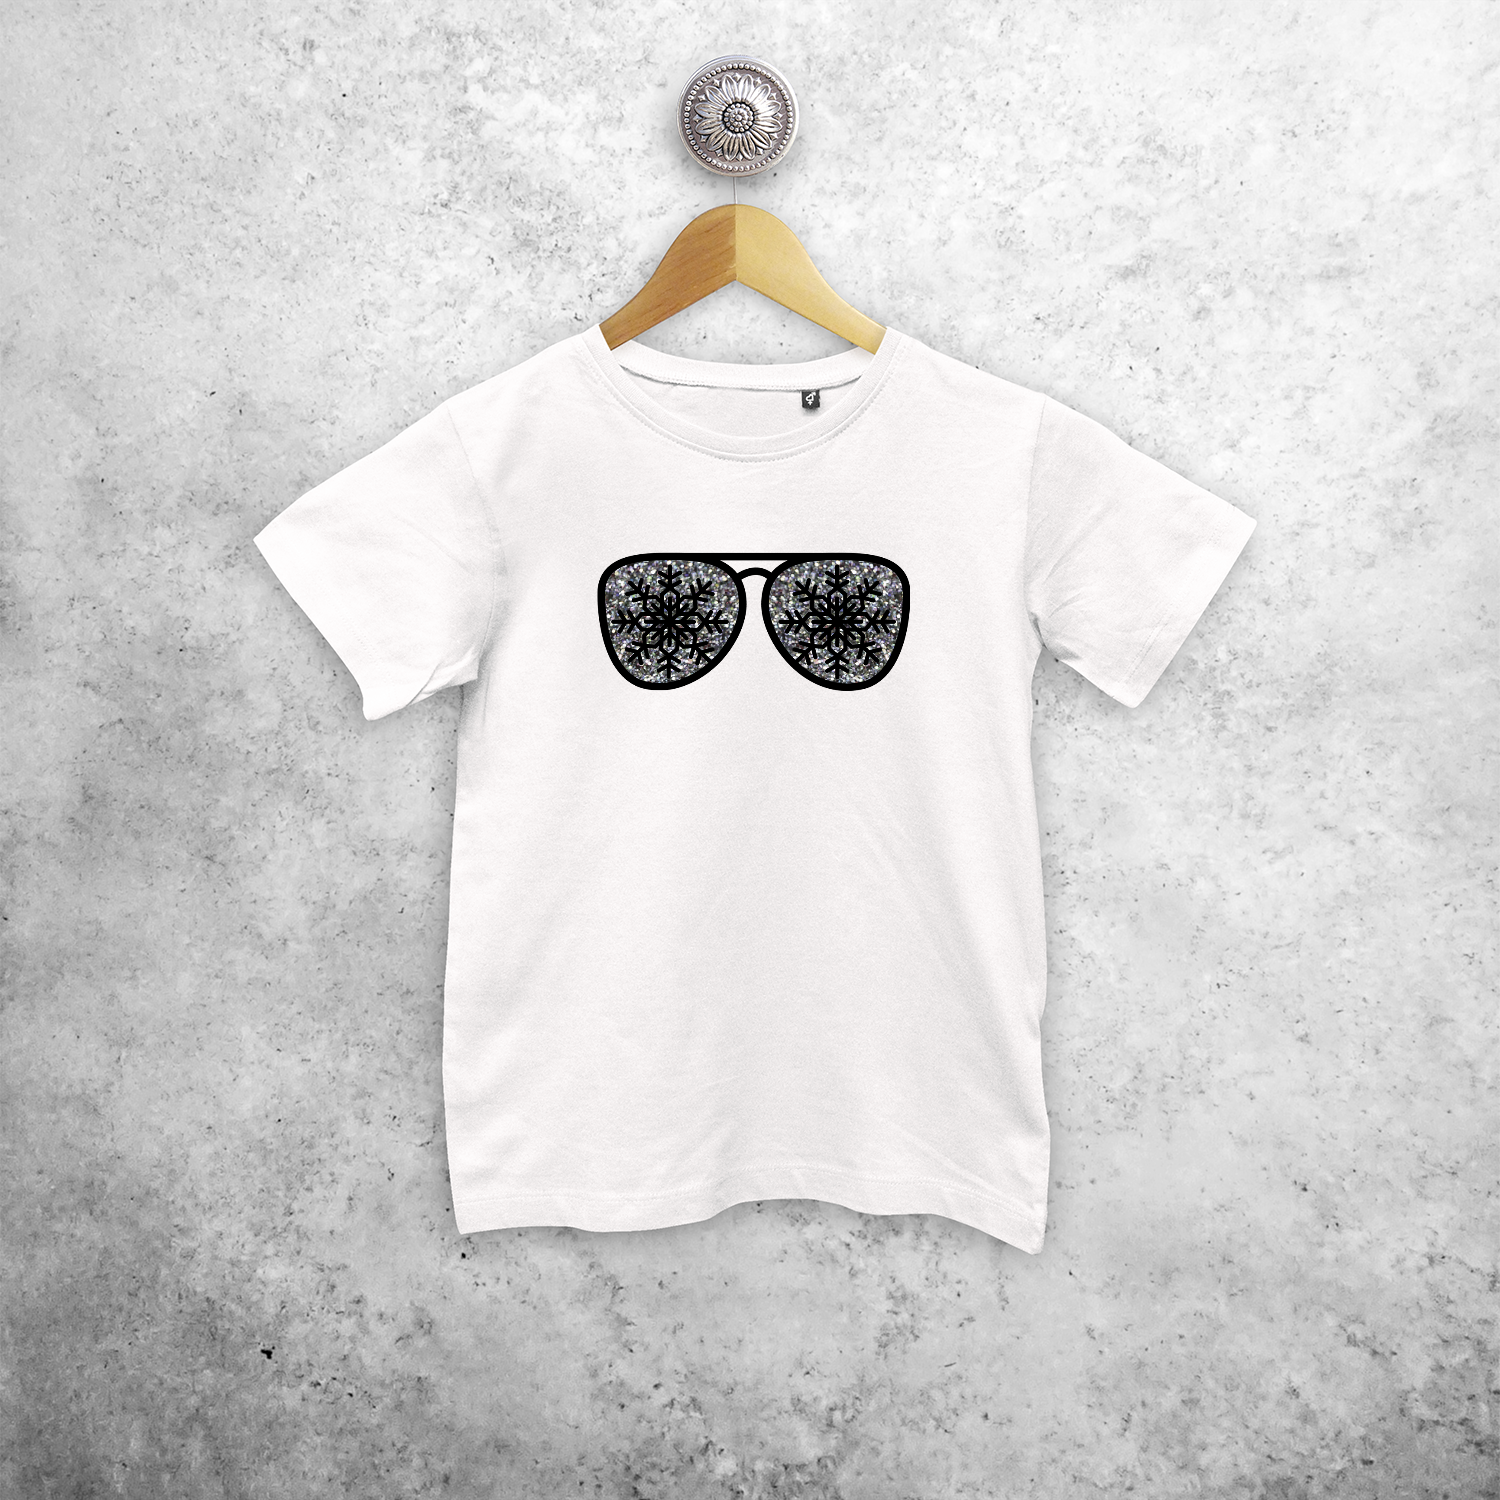 Kids shirt with short sleeves, with glitter snow star glasses print by KMLeon.